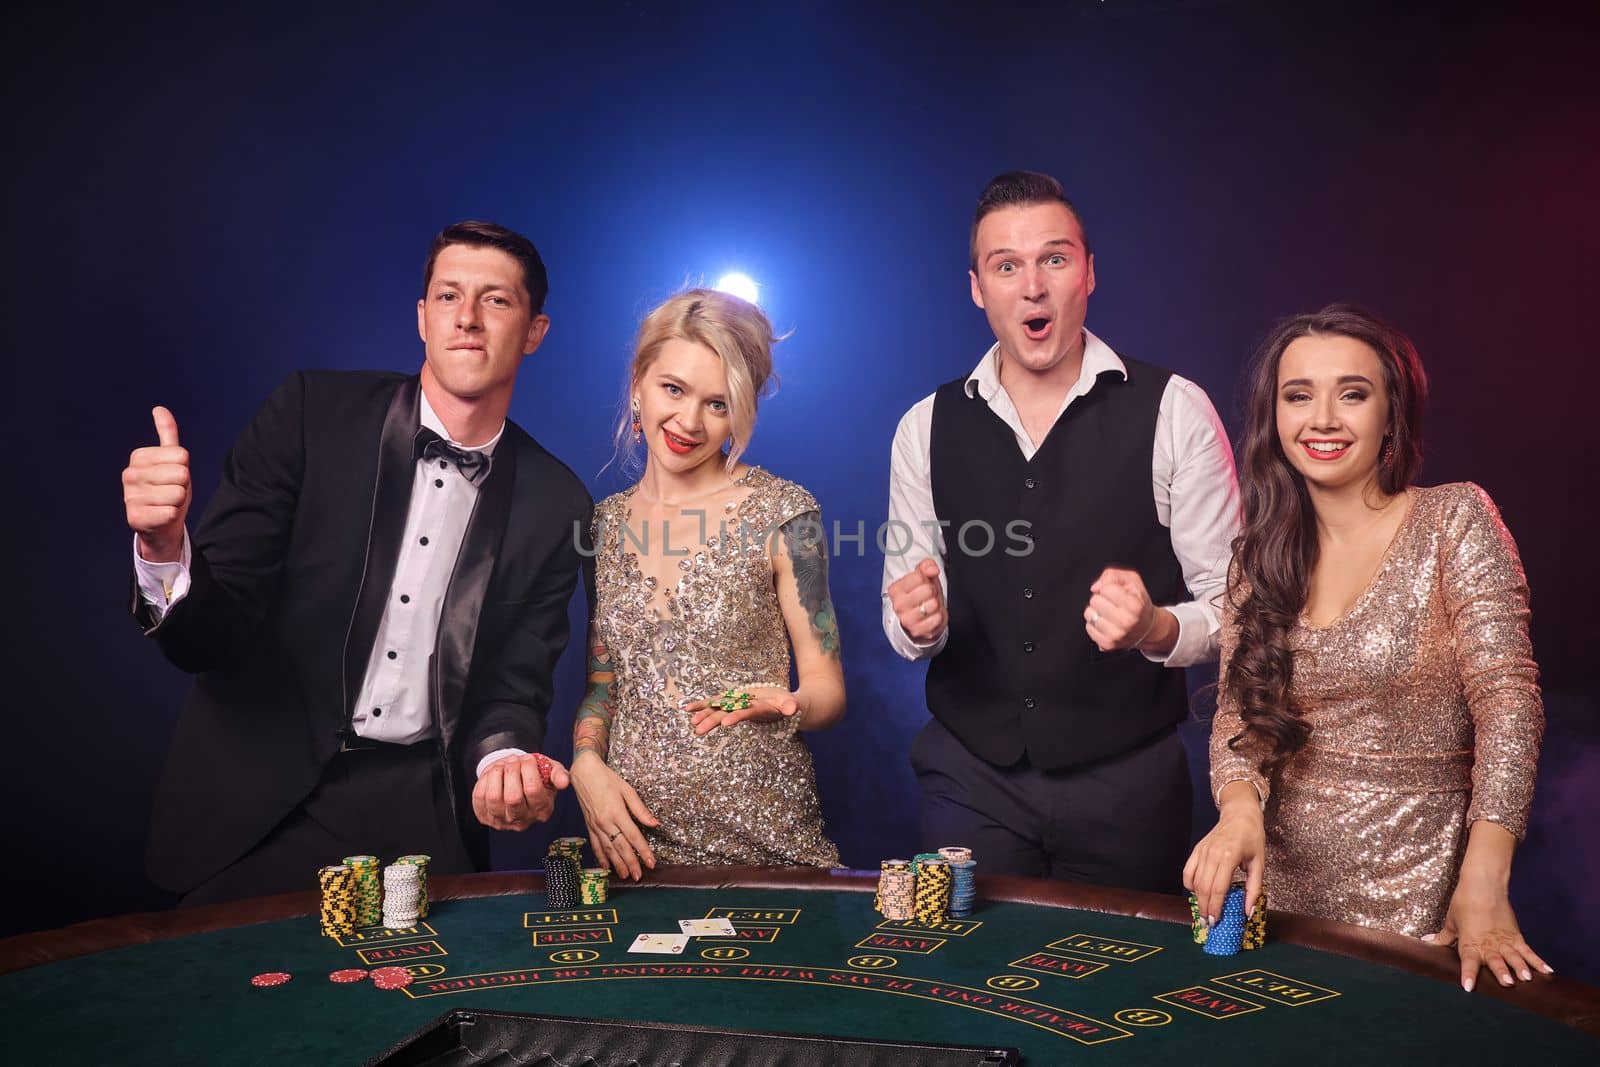 Group of an excited rich colleagues are playing poker at casino. Youth are making bets waiting for a big win. They are looking happy standing at the table against a red and blue backlights on black background. Risky gambling entertainment.